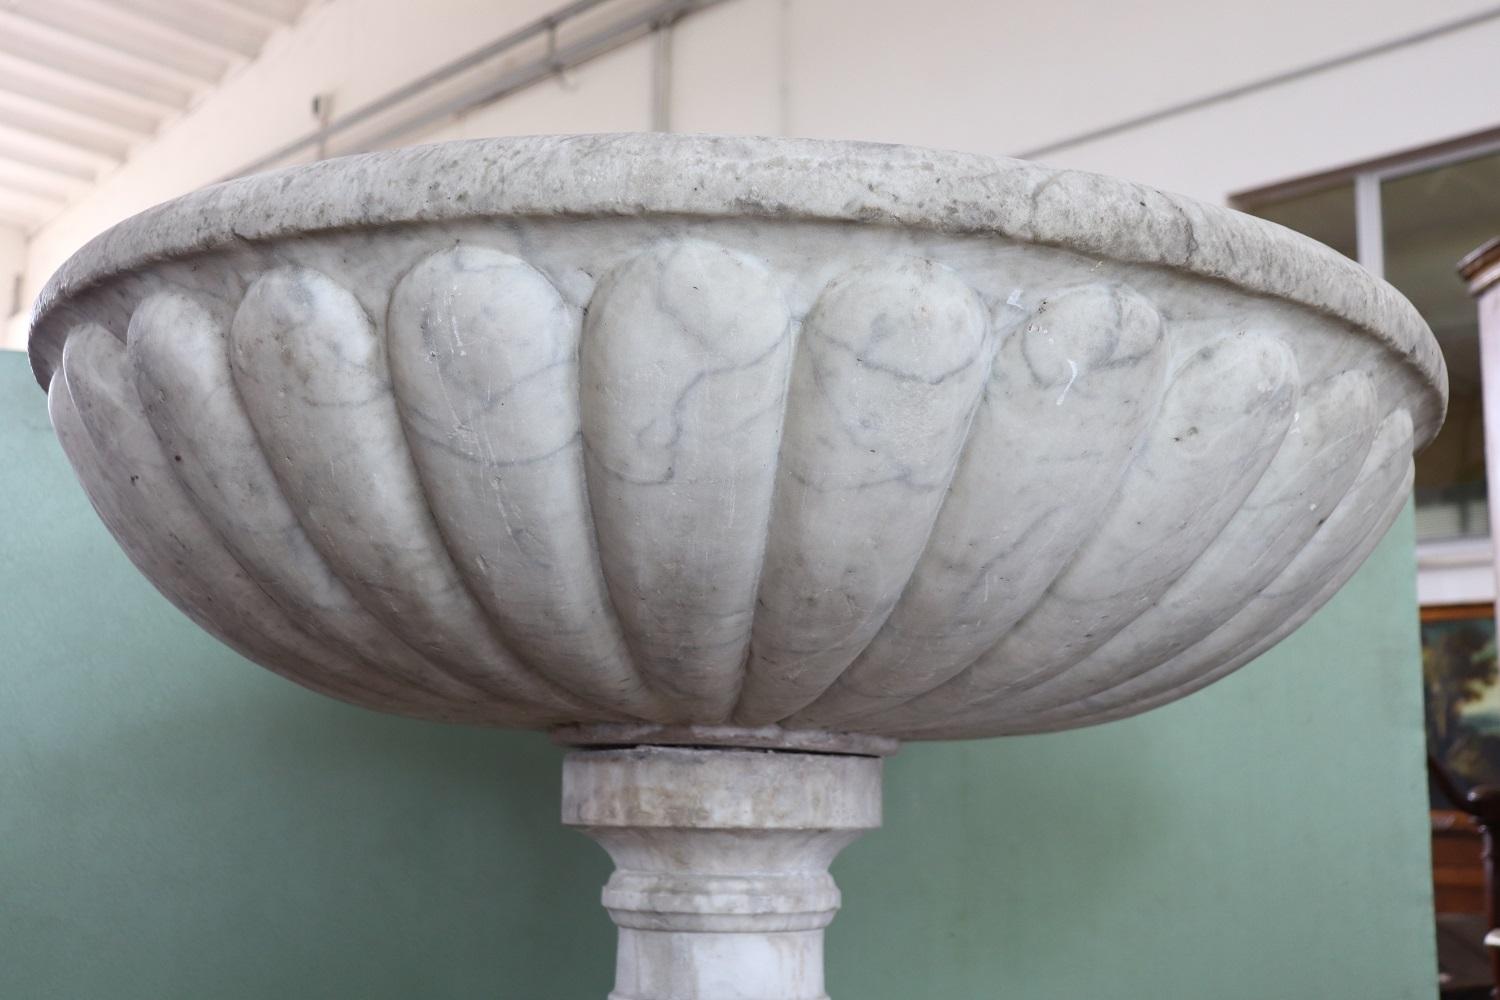 Rare Italian antique hand carved marble font. Made of fine hand-sculpted Italian white Carrara marble. The column has a beautiful turning. The large basin has a typical Baroque decoration called bacellatura which consists of a typical process